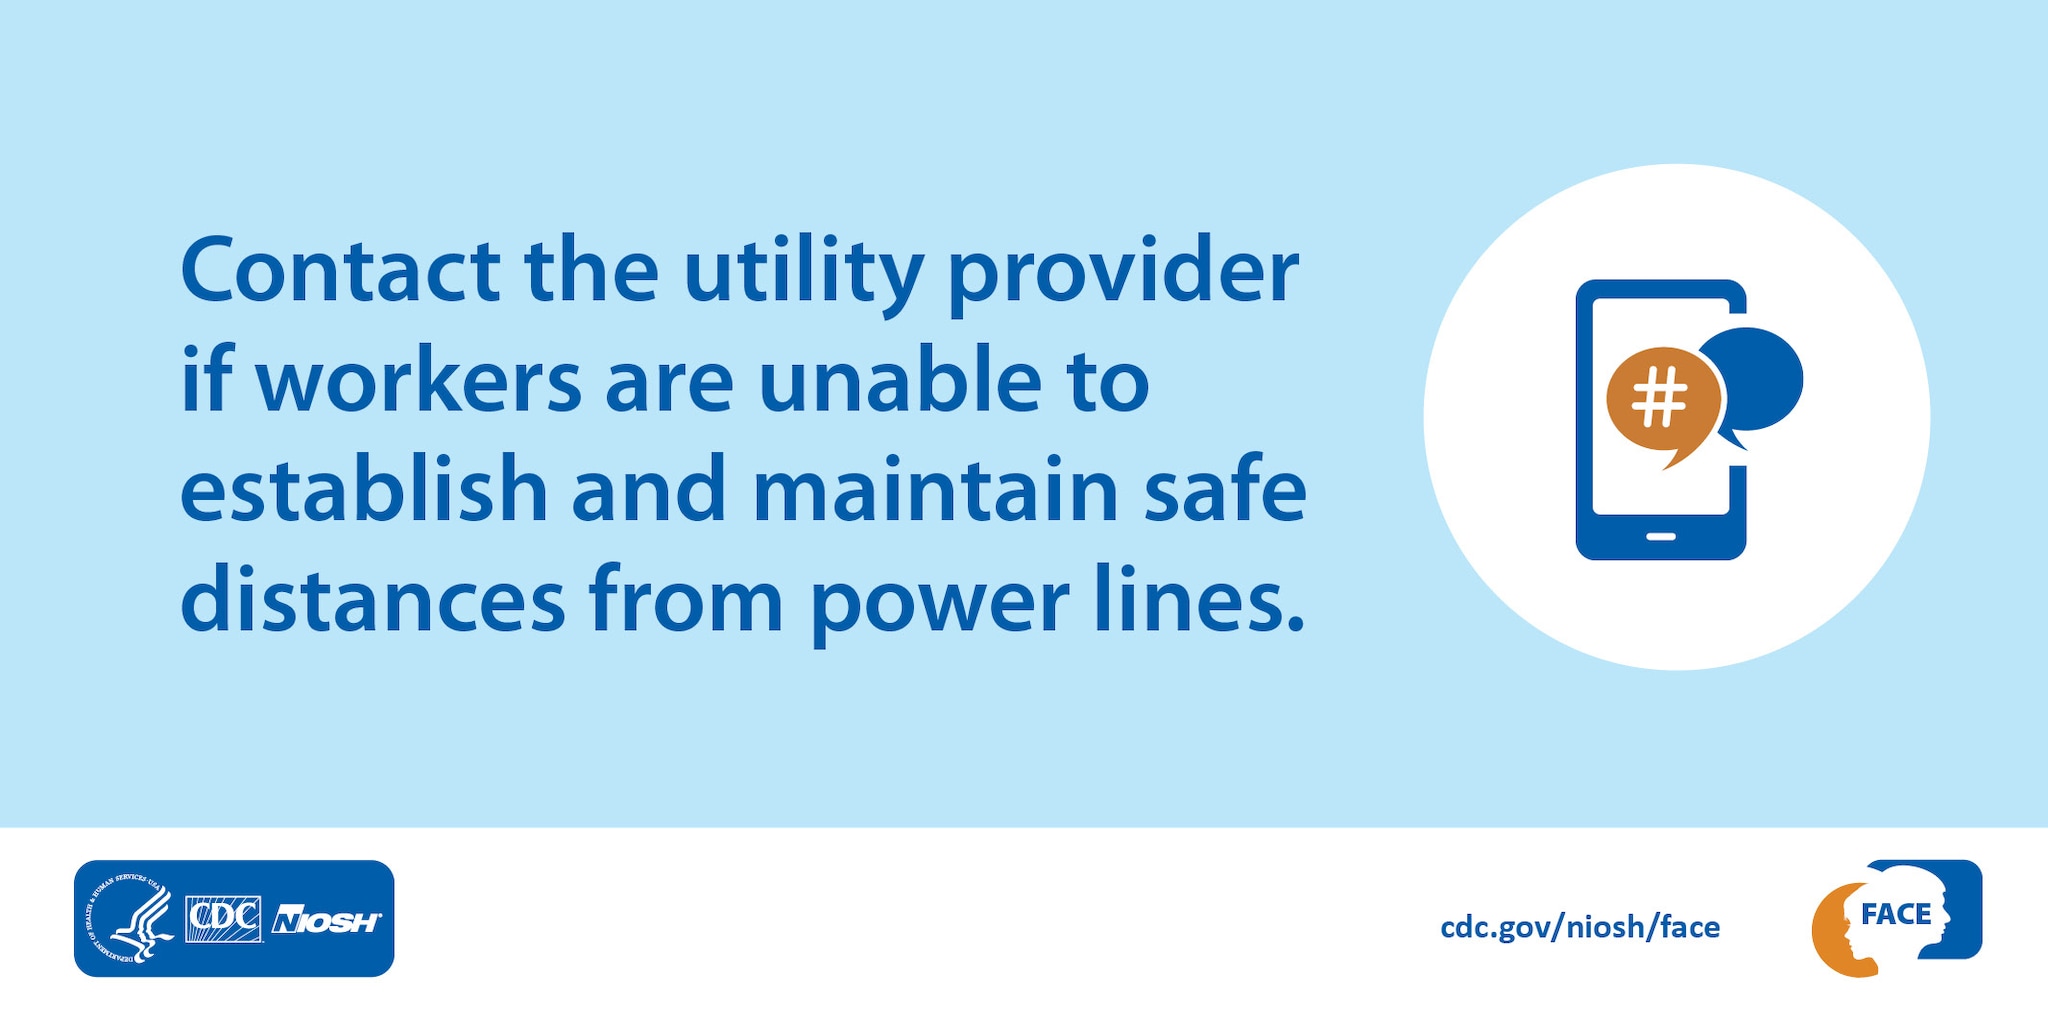 Contact the utility provider if workers are unable to establish and maintain safe distances from power lines.